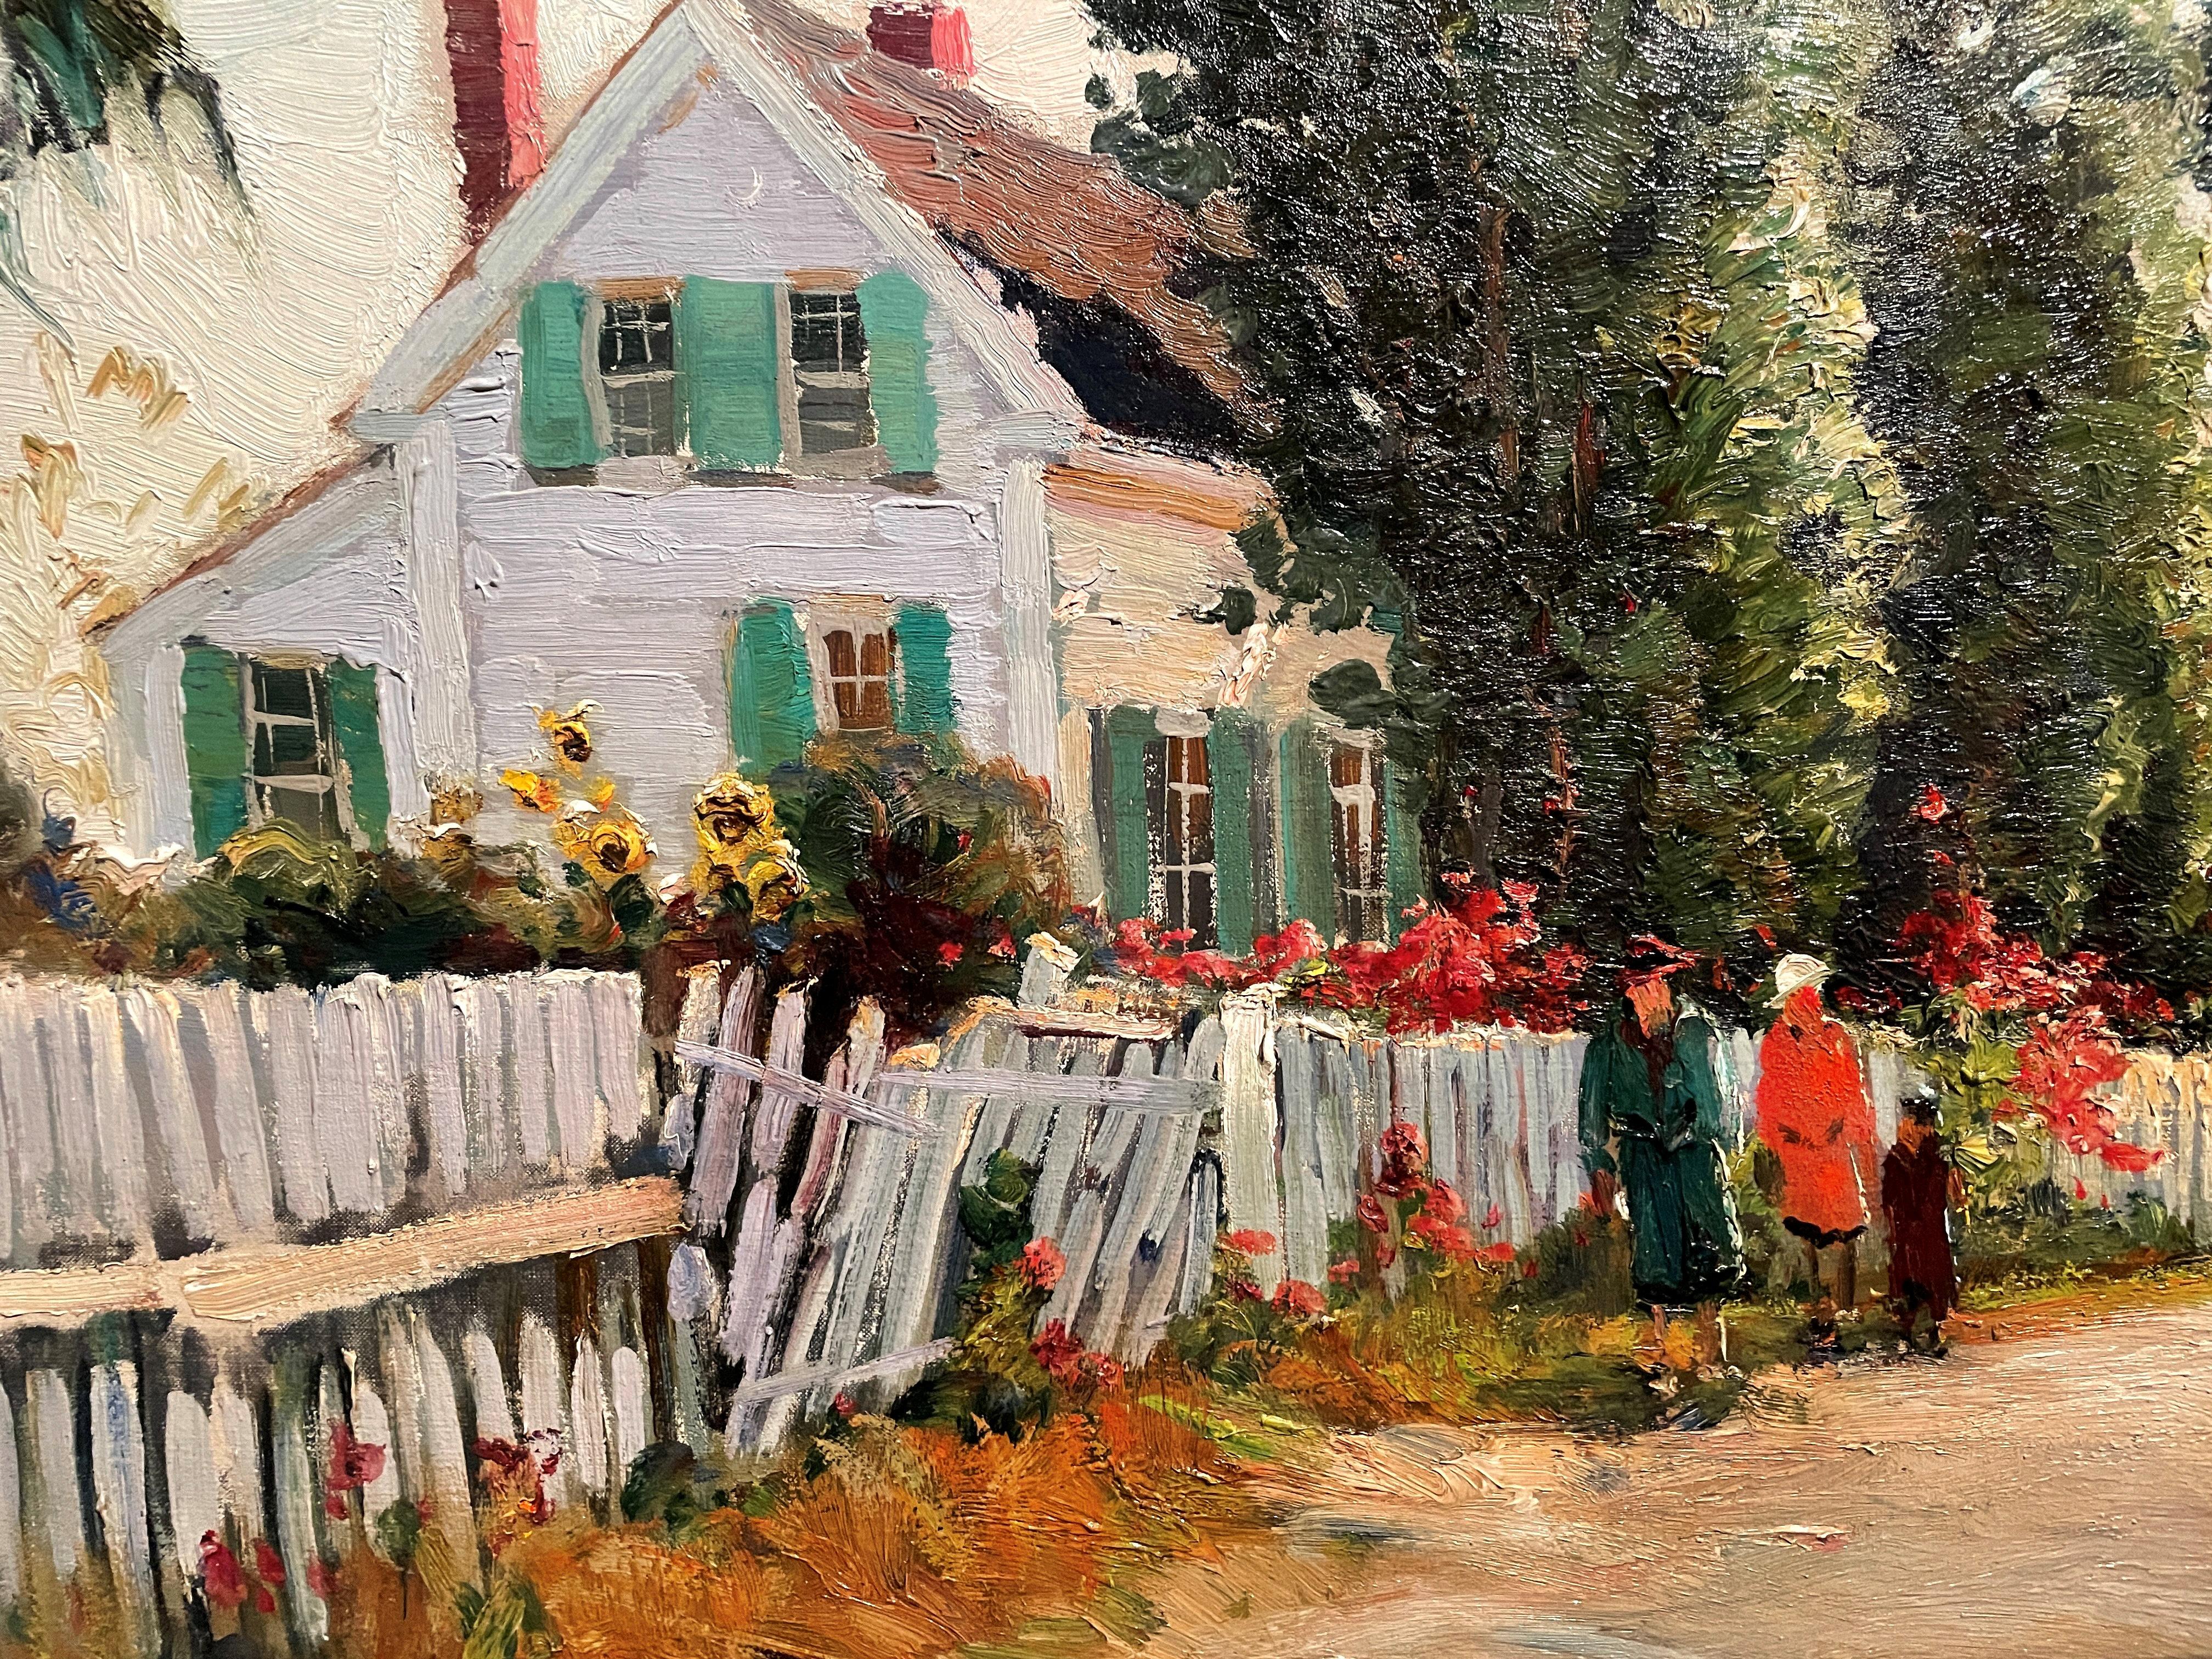 Anthony Thieme (1888 - 1954)
Other Side of Town (Leading to Pigeon Cove)
Oil on canvas
30 x 36 inches
Signed lower left

Provenance:
David H. Hall Fine Art, Dover, Massachusetts
Vose Galleries, Boston, Massachusetts
Private Collection, New